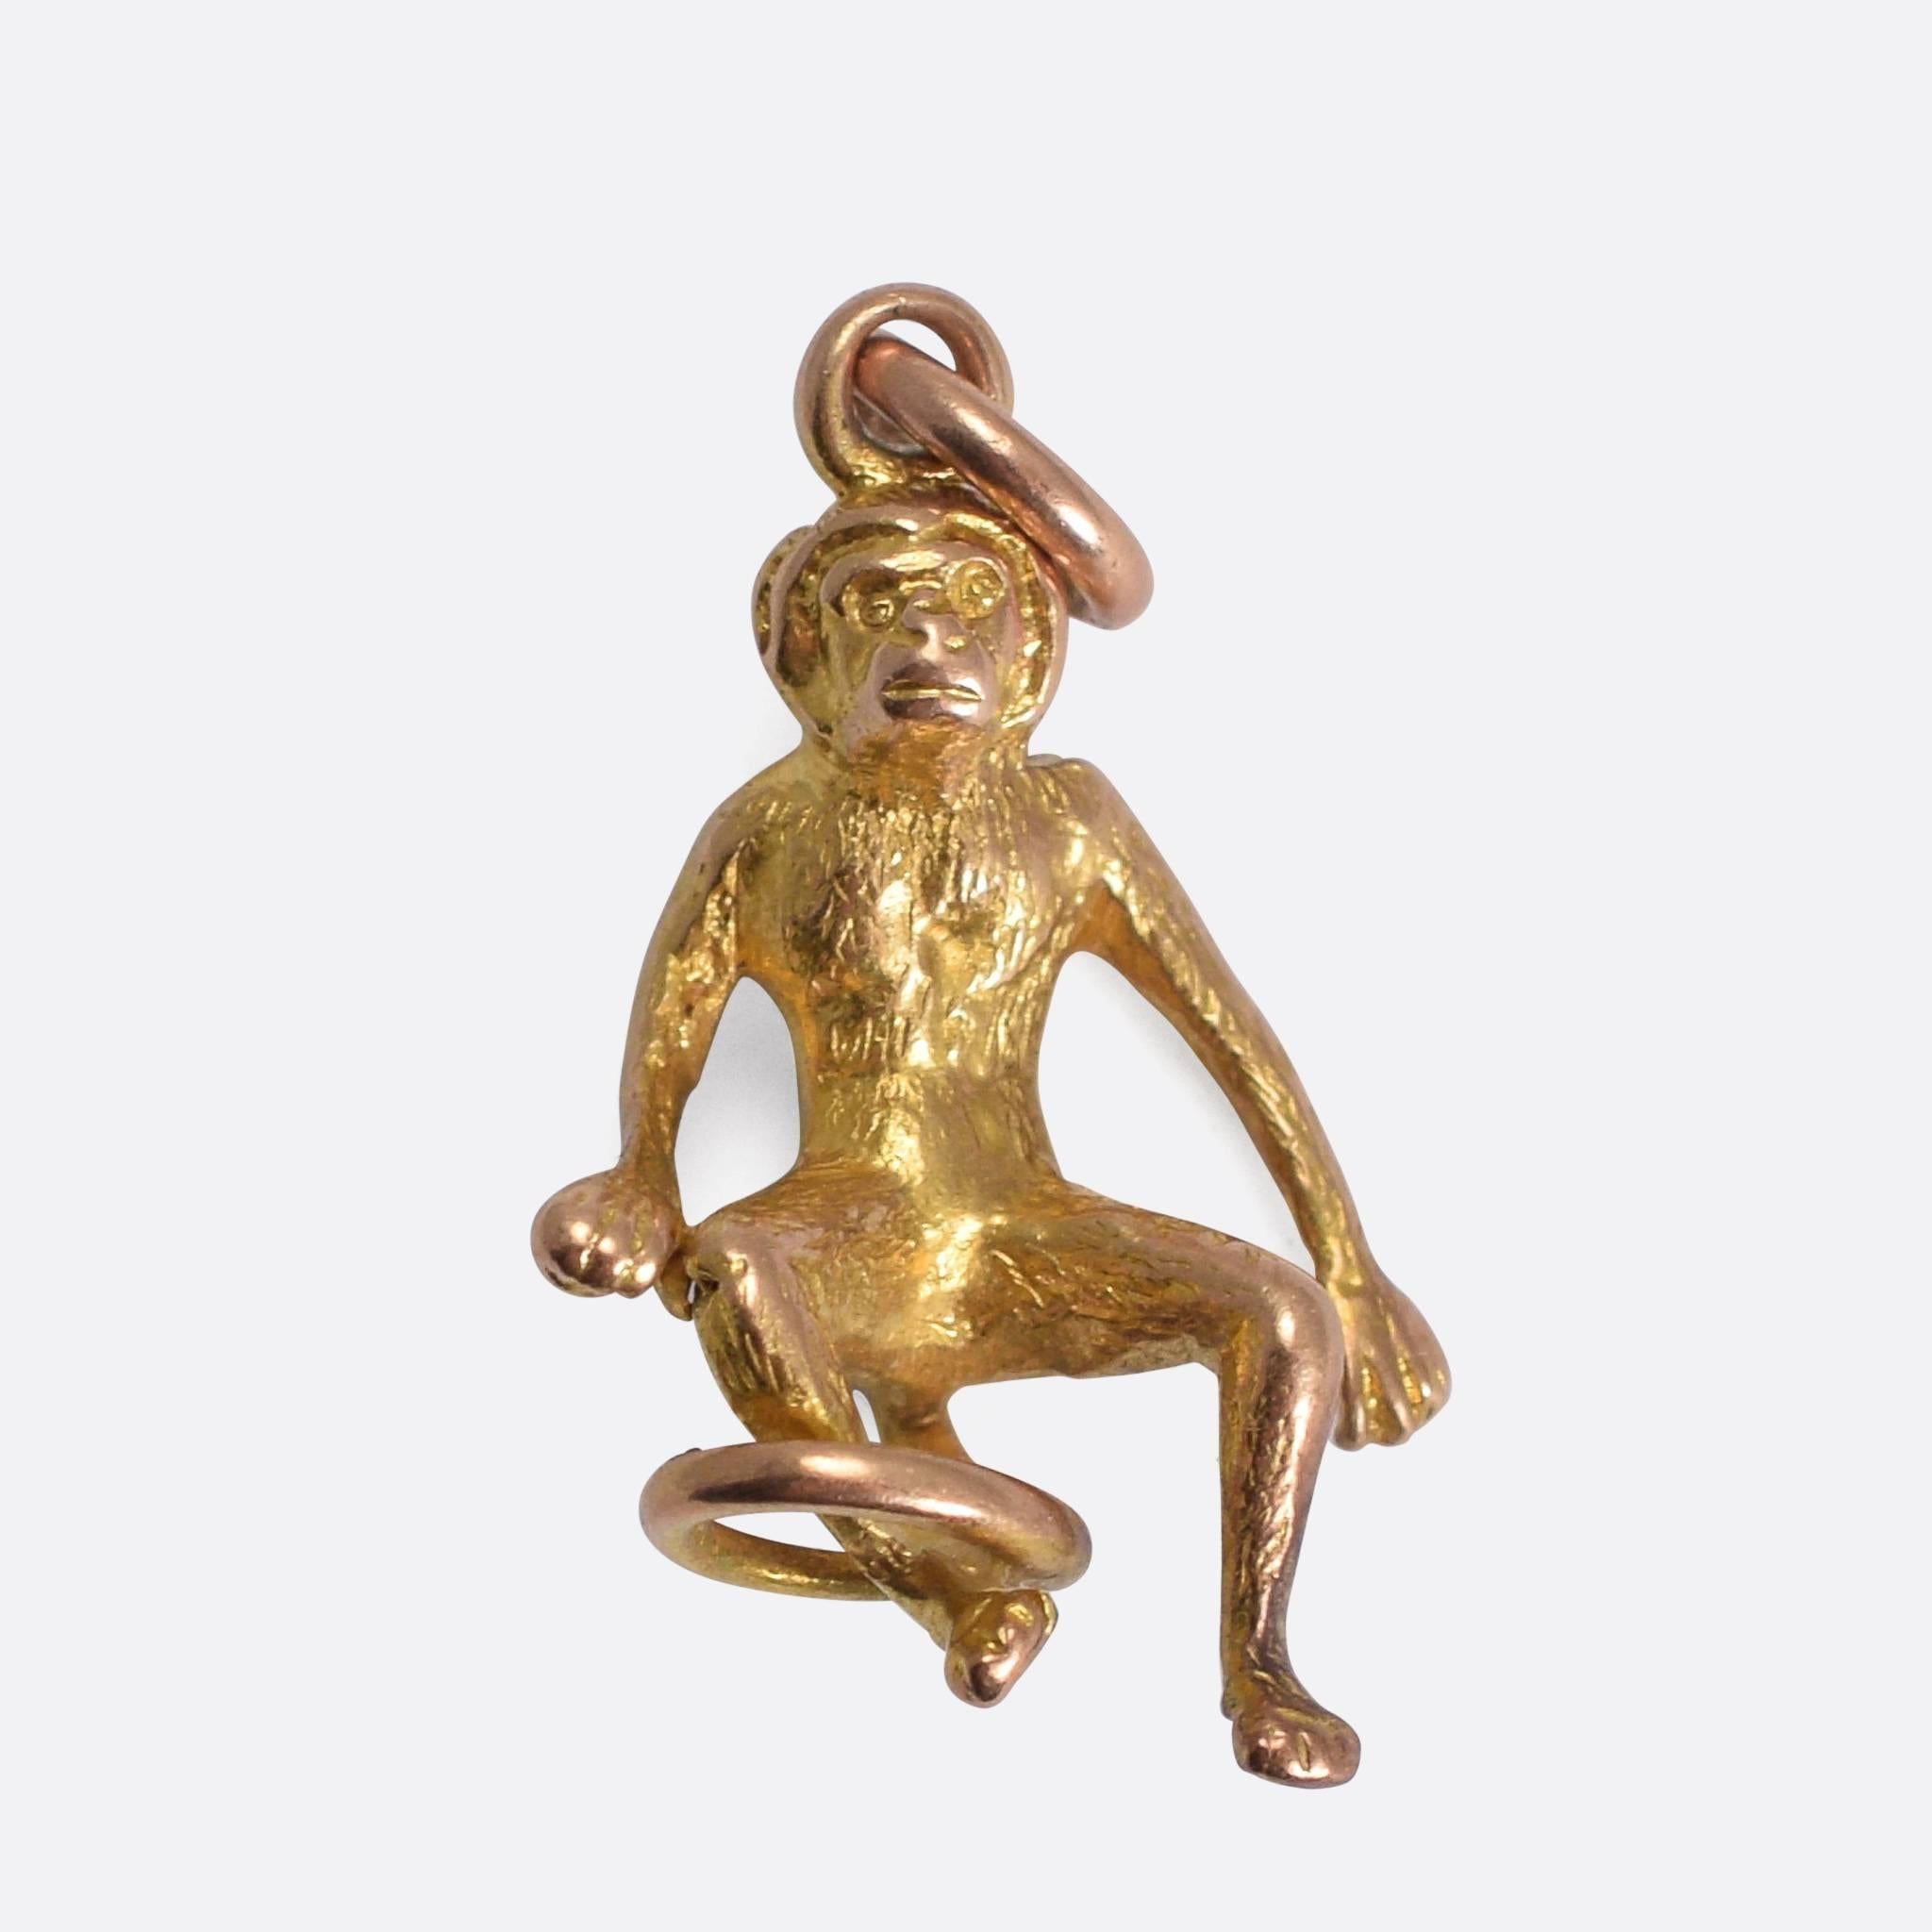 A cute antique monkey charm, modelled in 9k gold. The piece is beautifully detailed, both front and back, with a looped tail.

MEASUREMENTS
2.1 x 1.3cm

WEIGHT
2.6g

MARKS
No marks present, tests as 9k gold